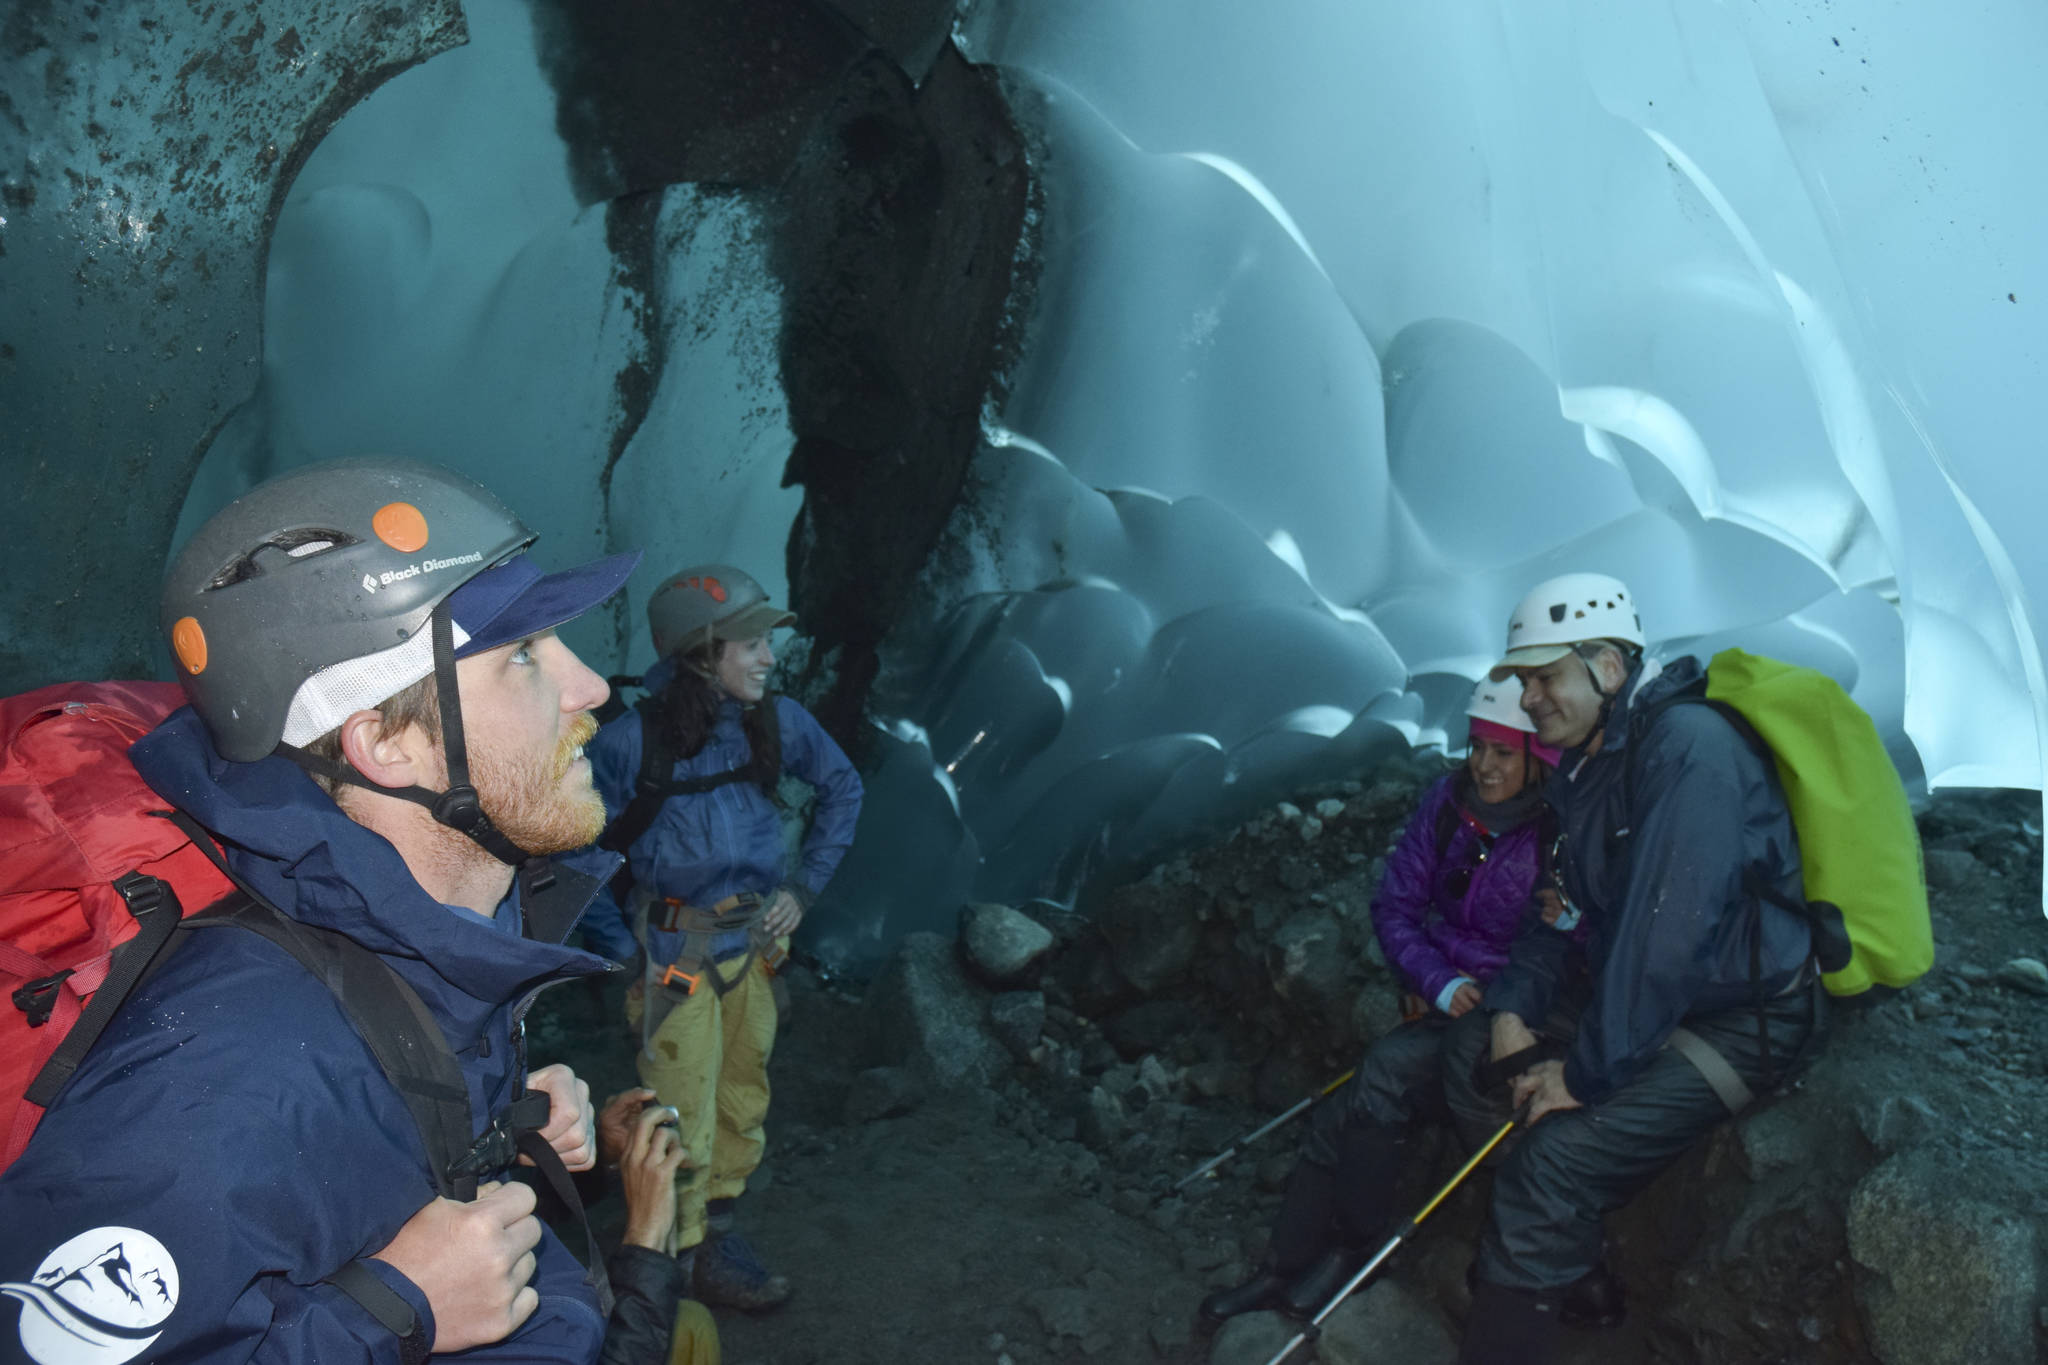 Above and Beyond Alaska tour guides Ben Hines, left, and Sarah Galvin, middle, talk with tourists Miguel Faur and Maria Isabel Ramos in the Mendenhall Glacier ice caves on Wednesday. (Kevin Gullufsen | Juneau Empire)